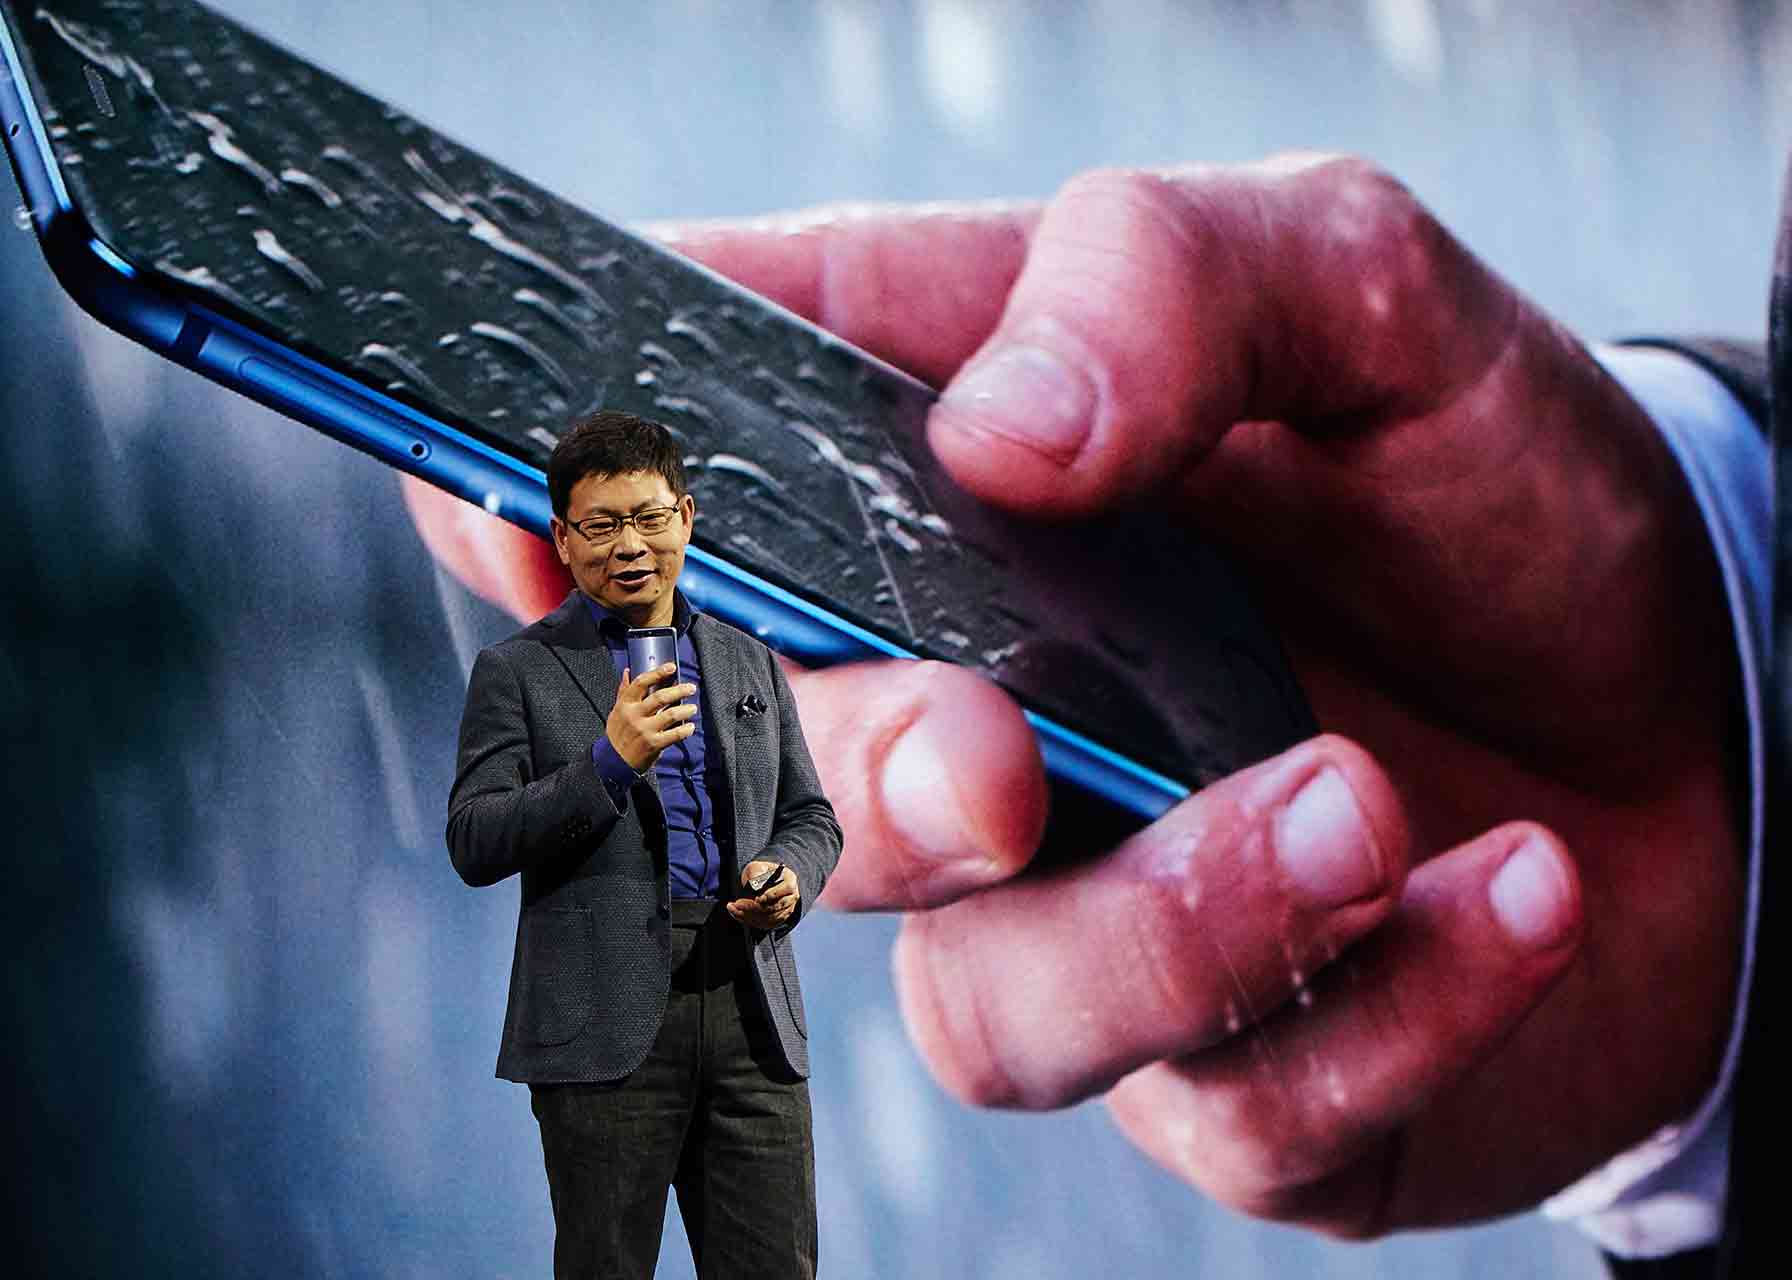 Mr. Richard Yu, president of Huawei, on stage presenting a new model of Huawei smartphone